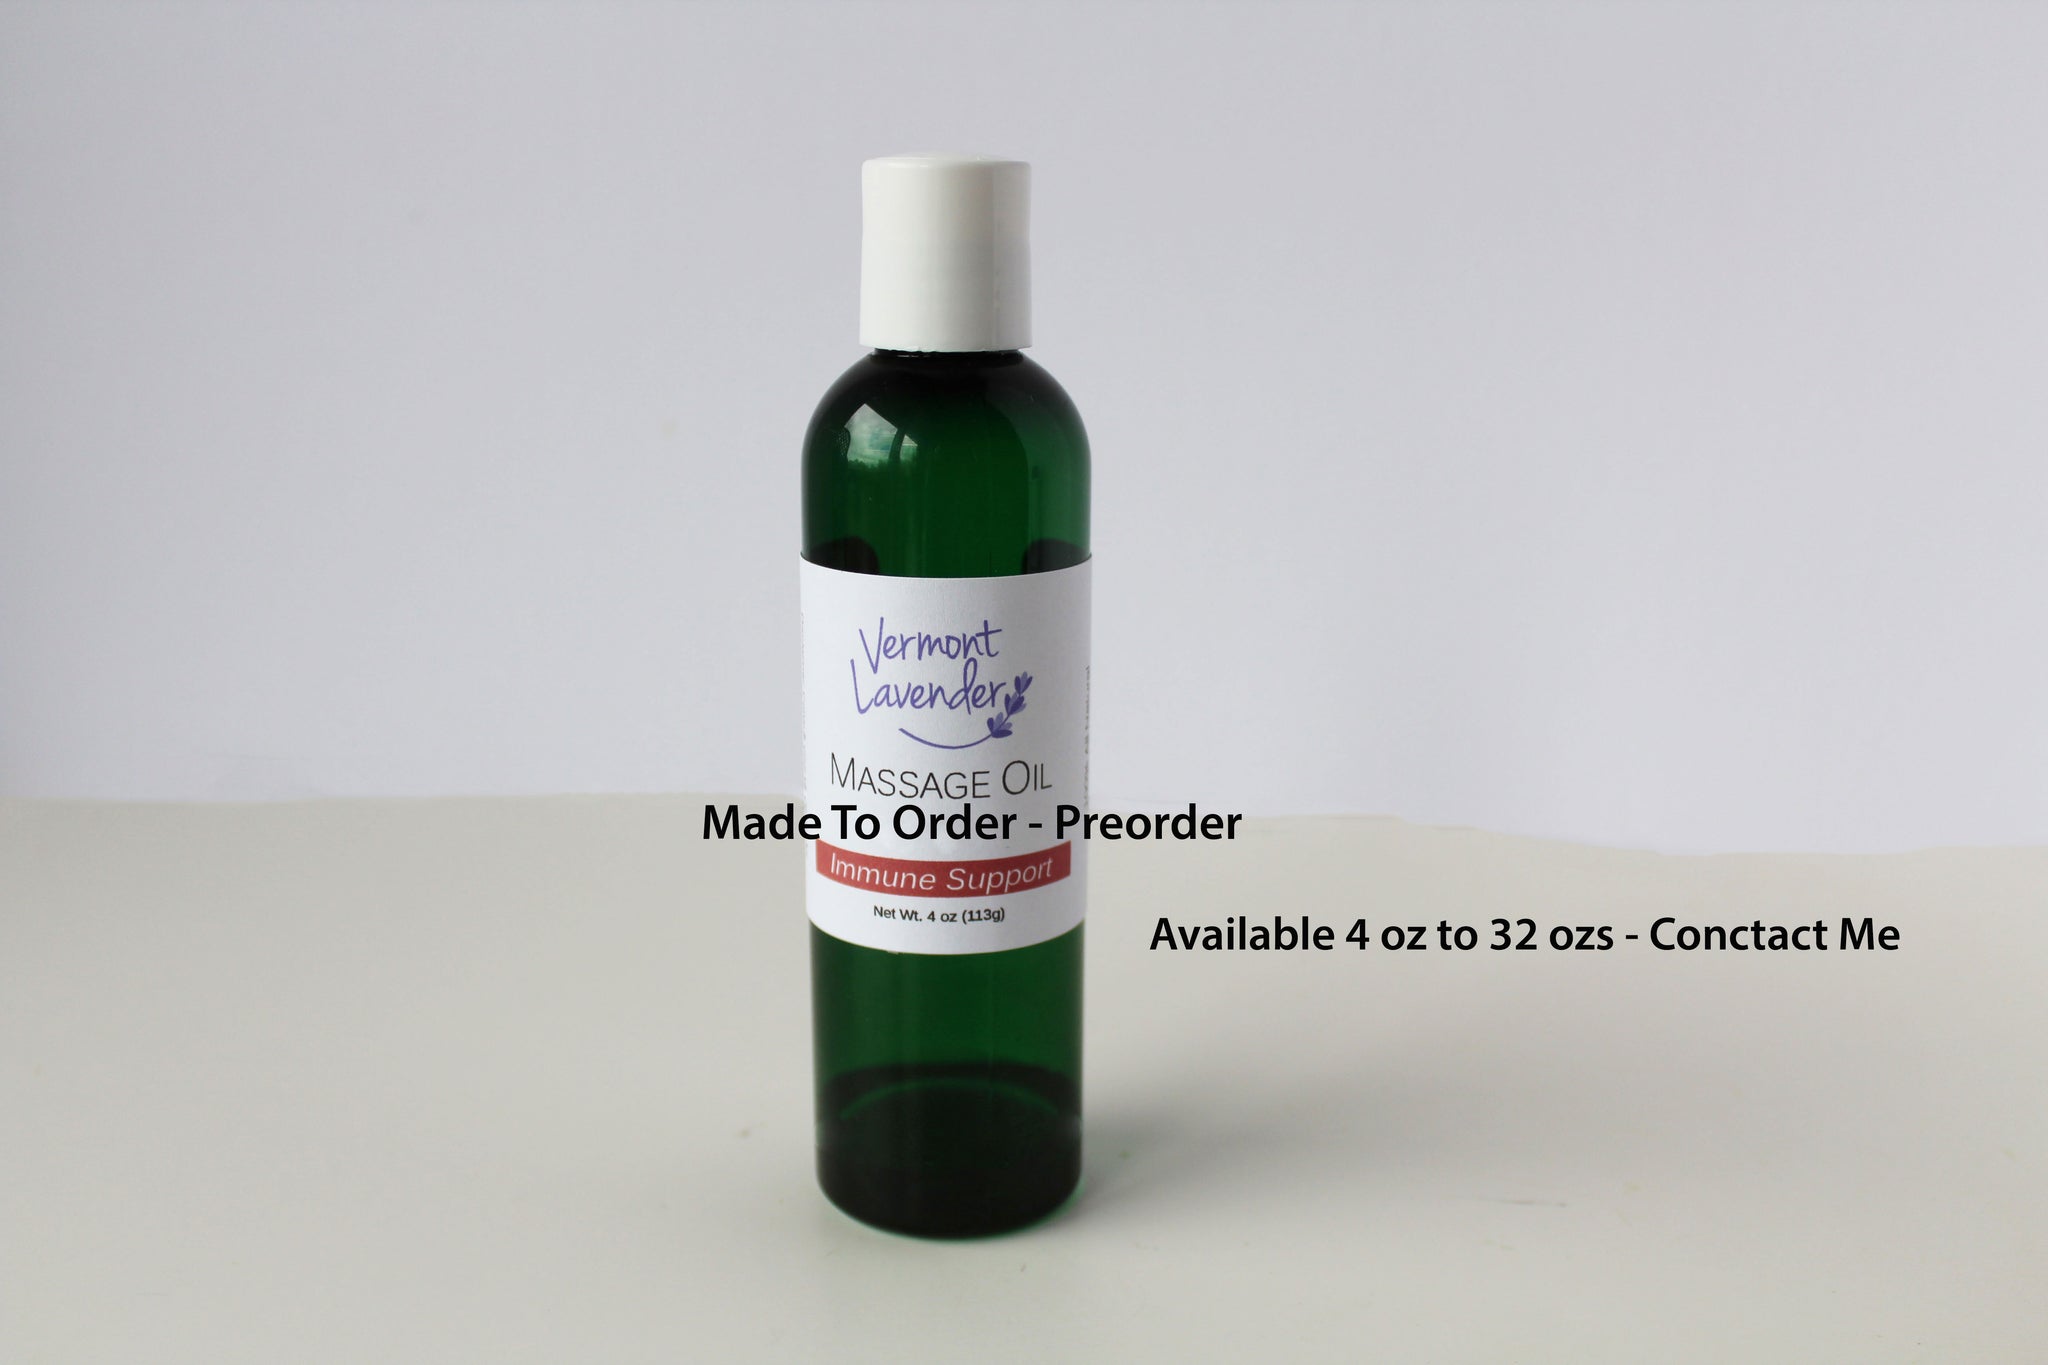 Massage oil Immune support for Massage Therapists